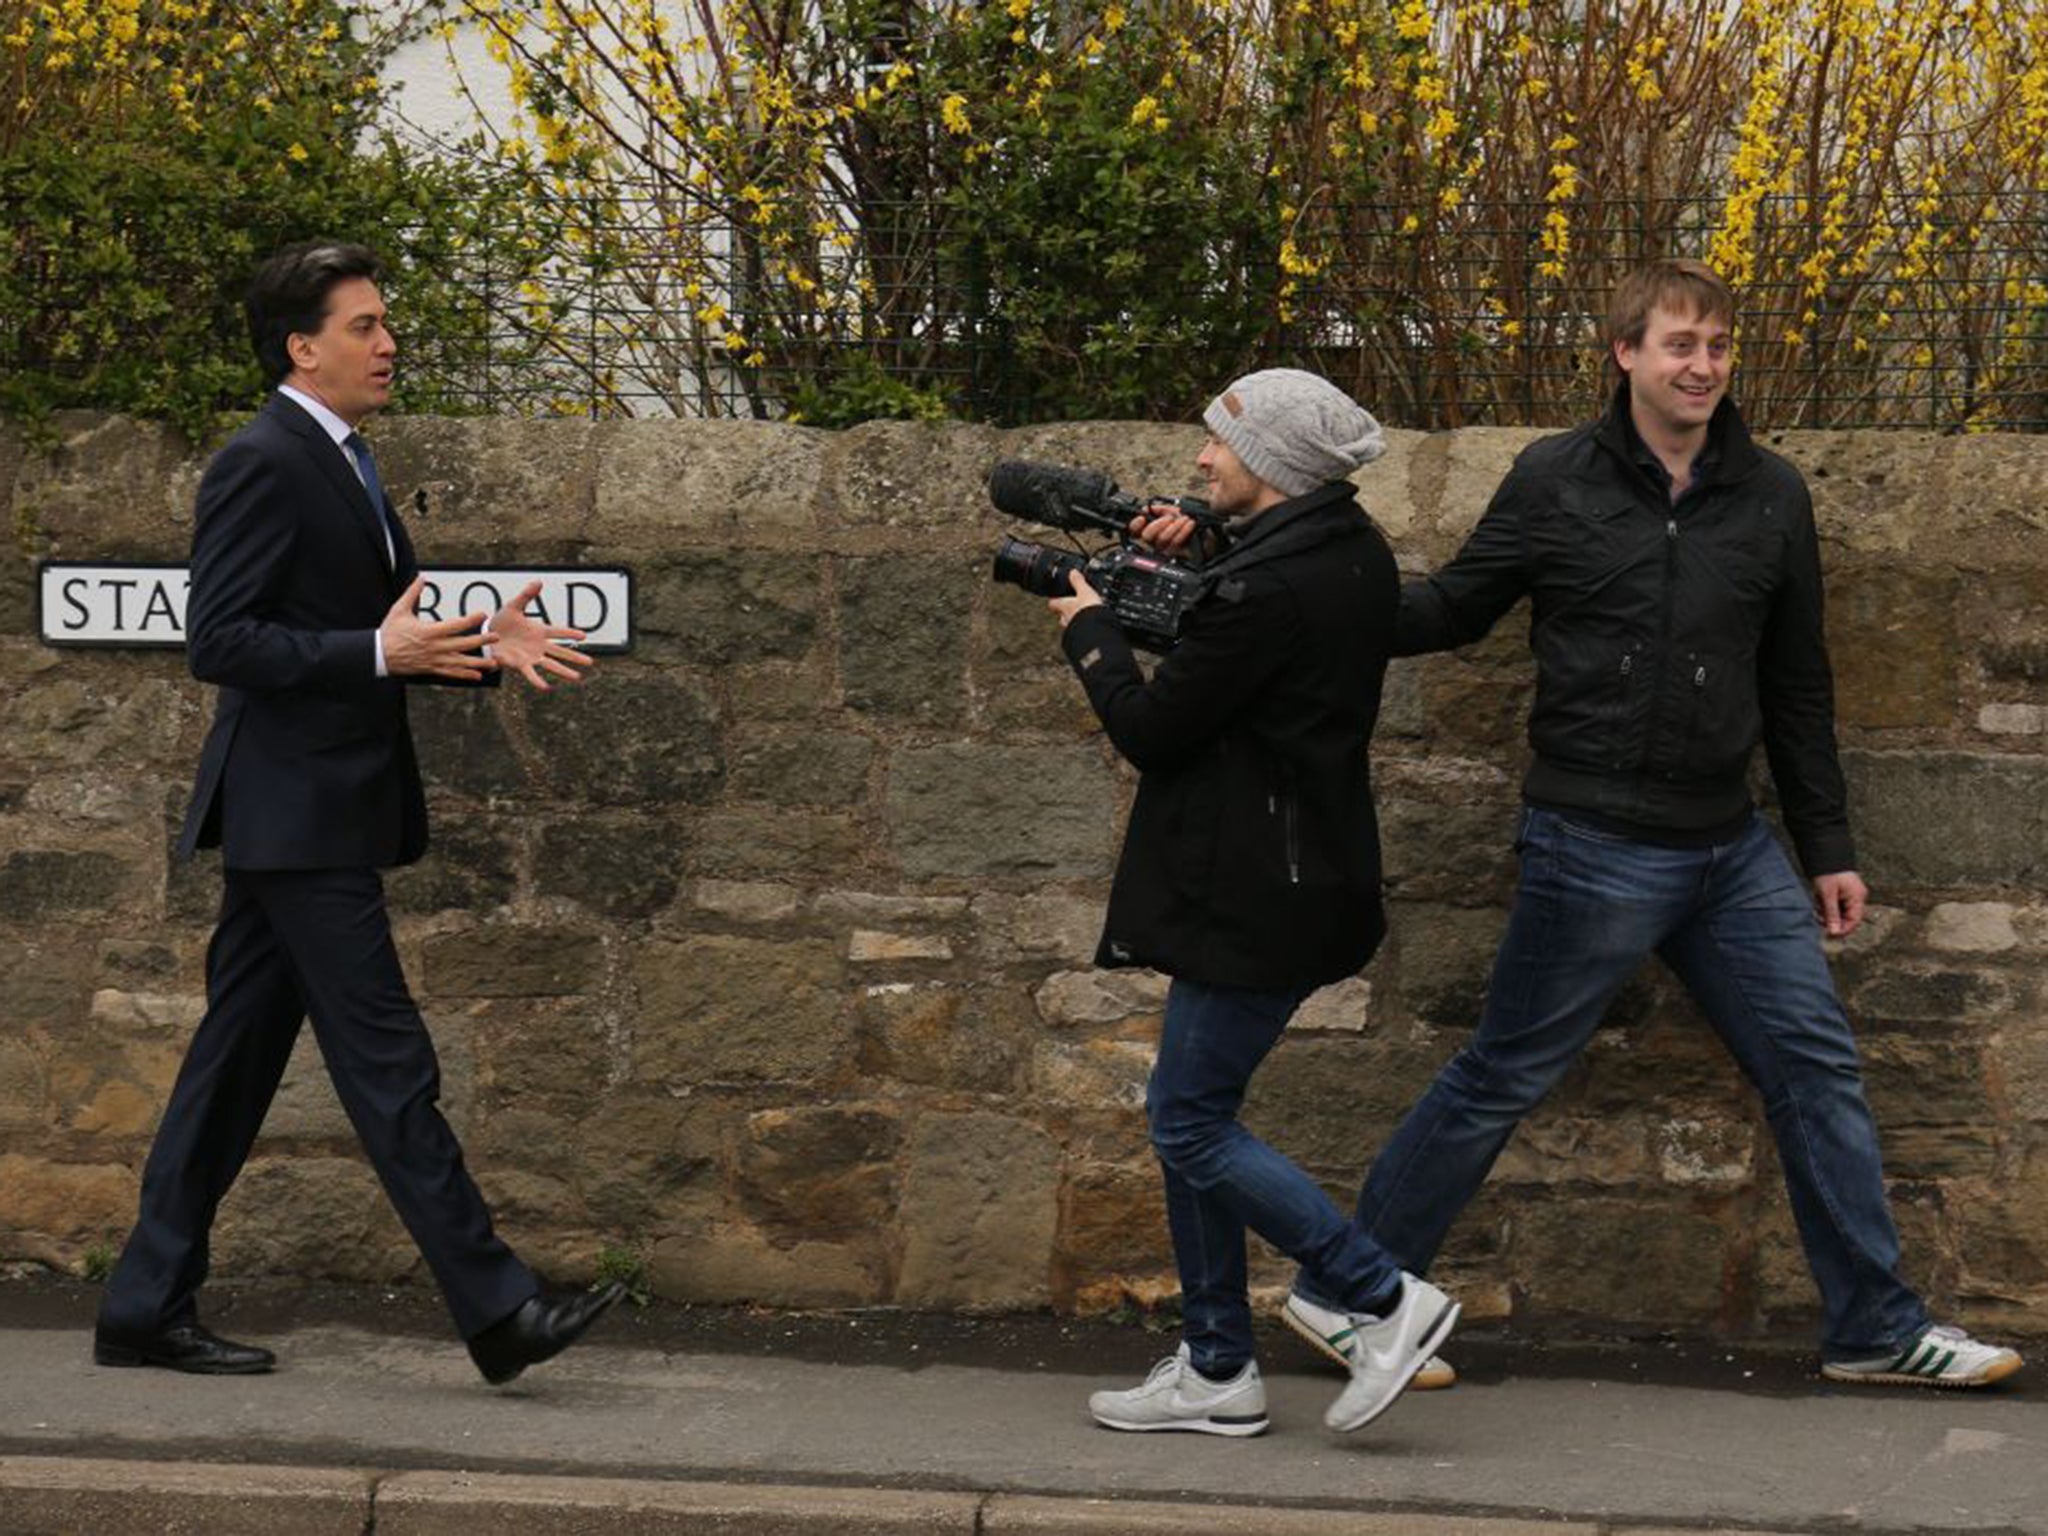 Ed Miliband's team has been criticised for a lack of access given to journalists on the campaign trail